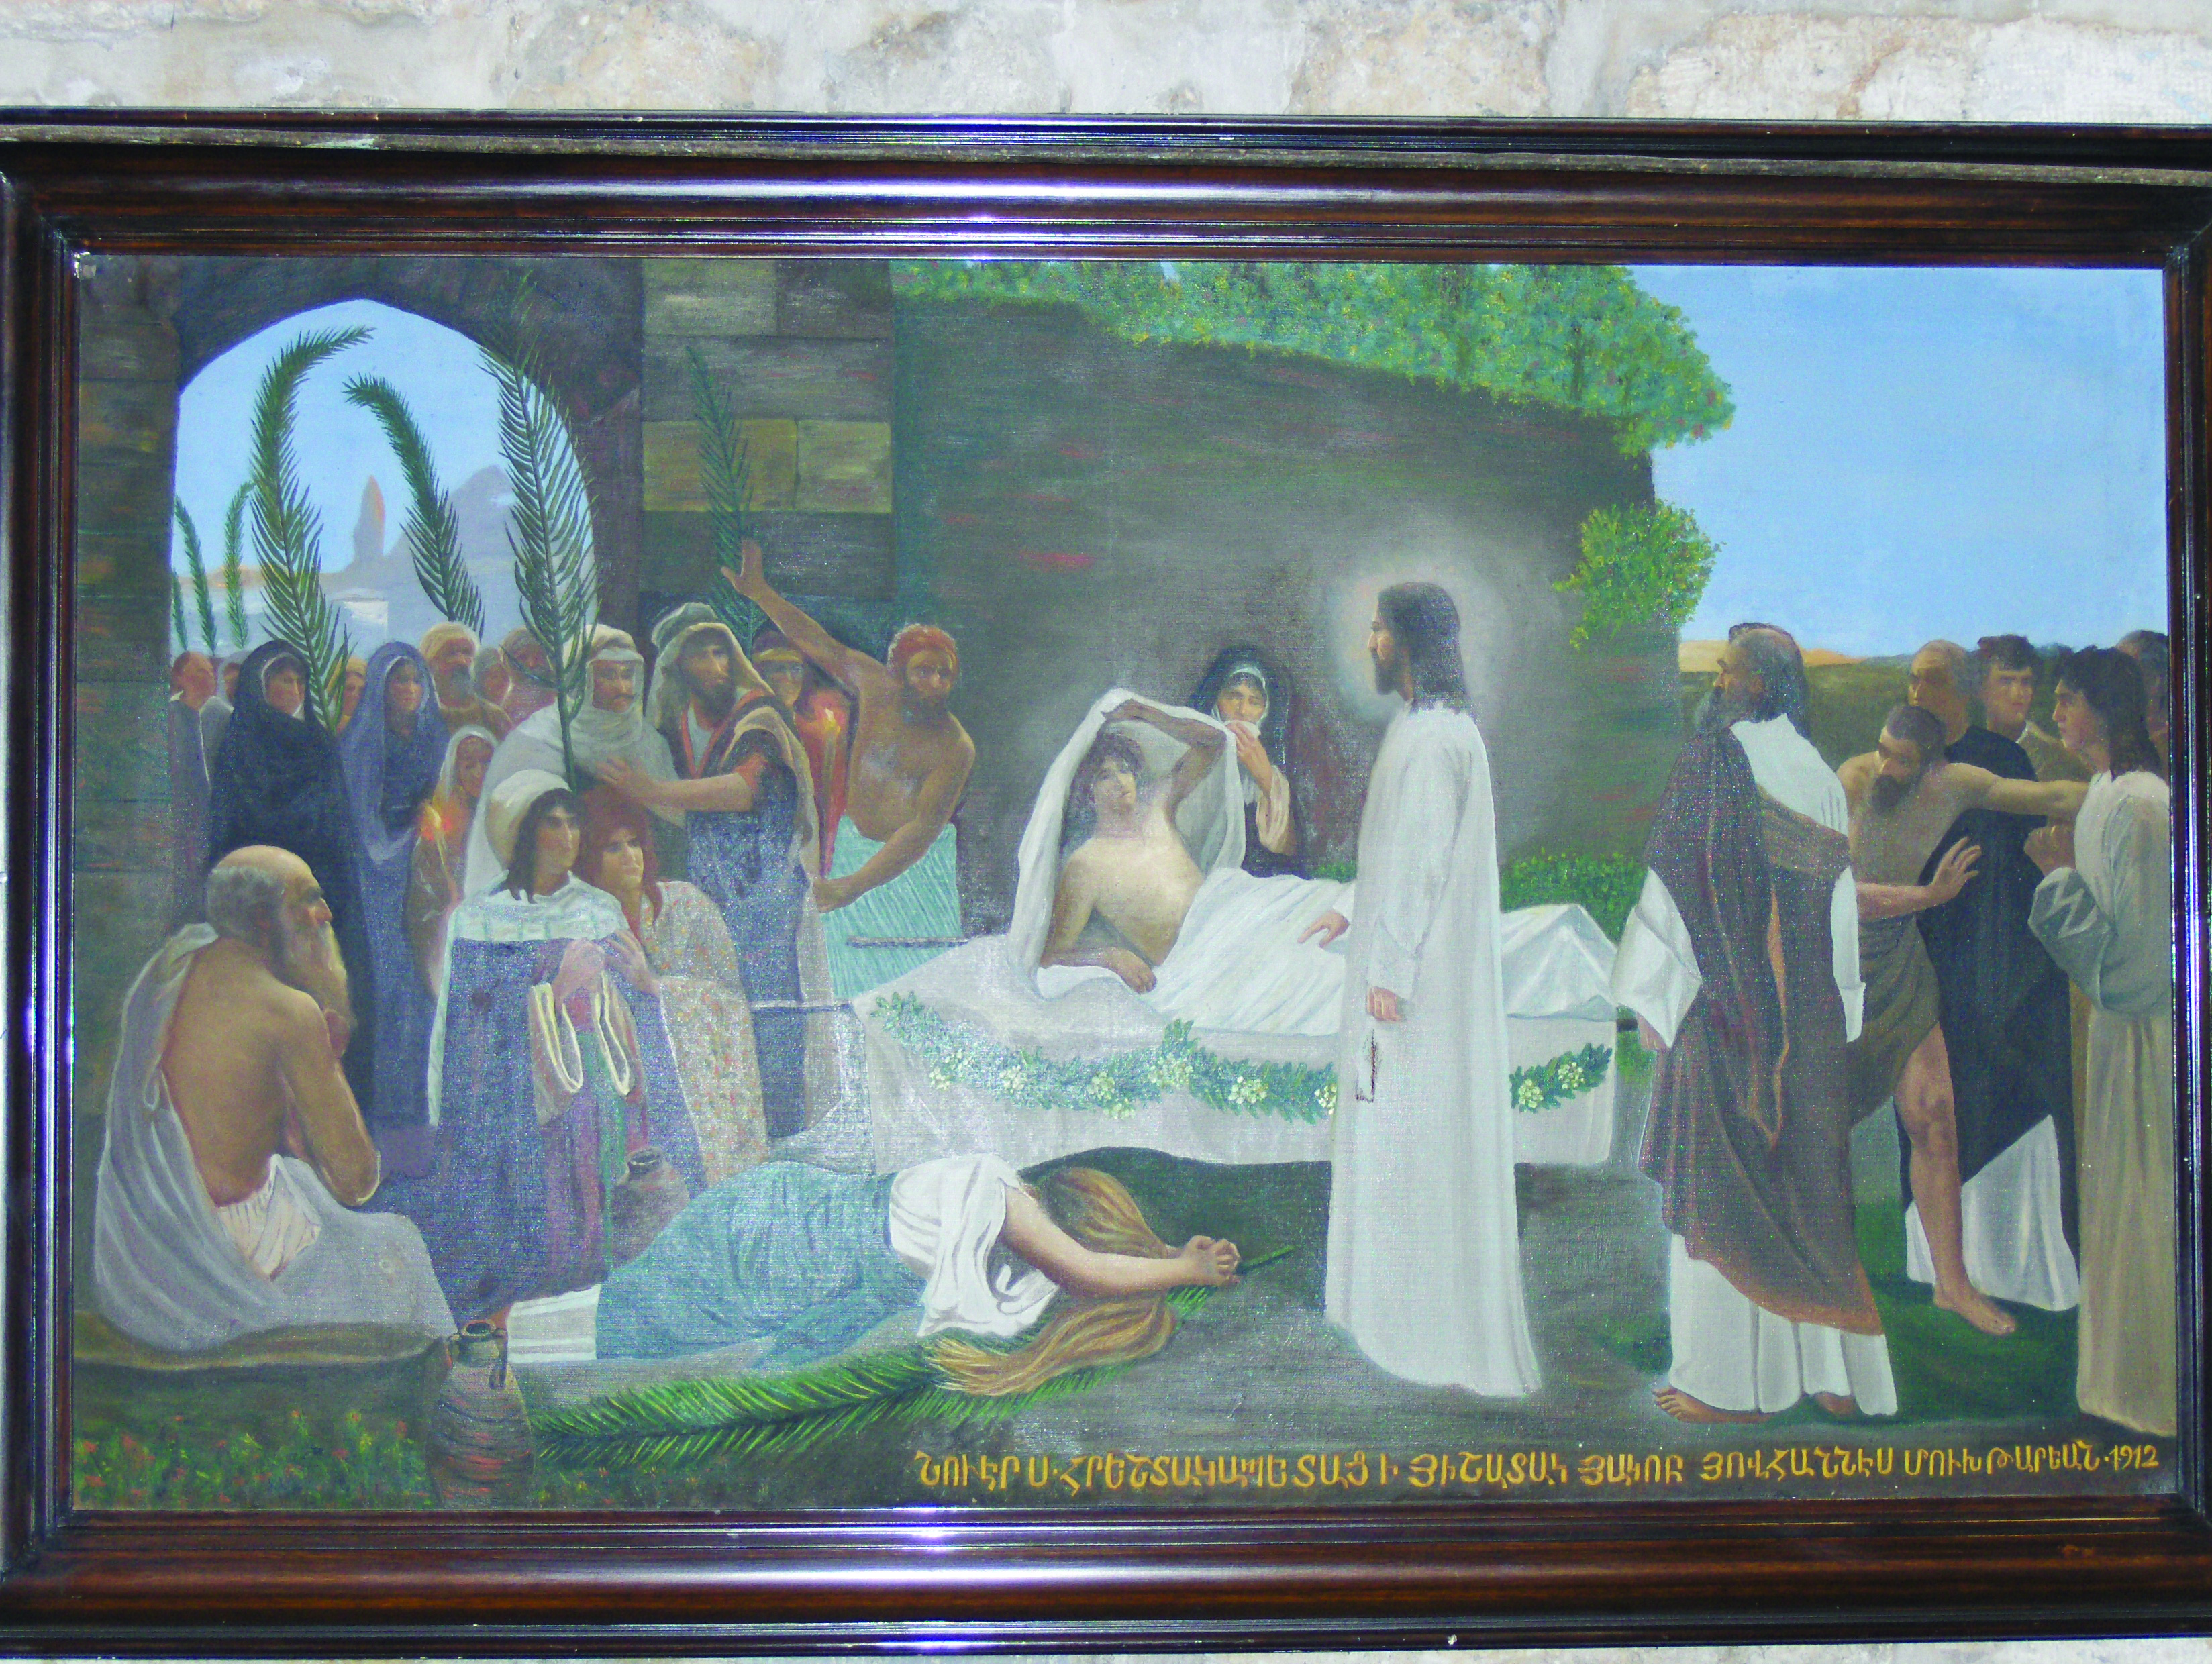 Painting of the Raising of Lazarus | Saint Mary's Press